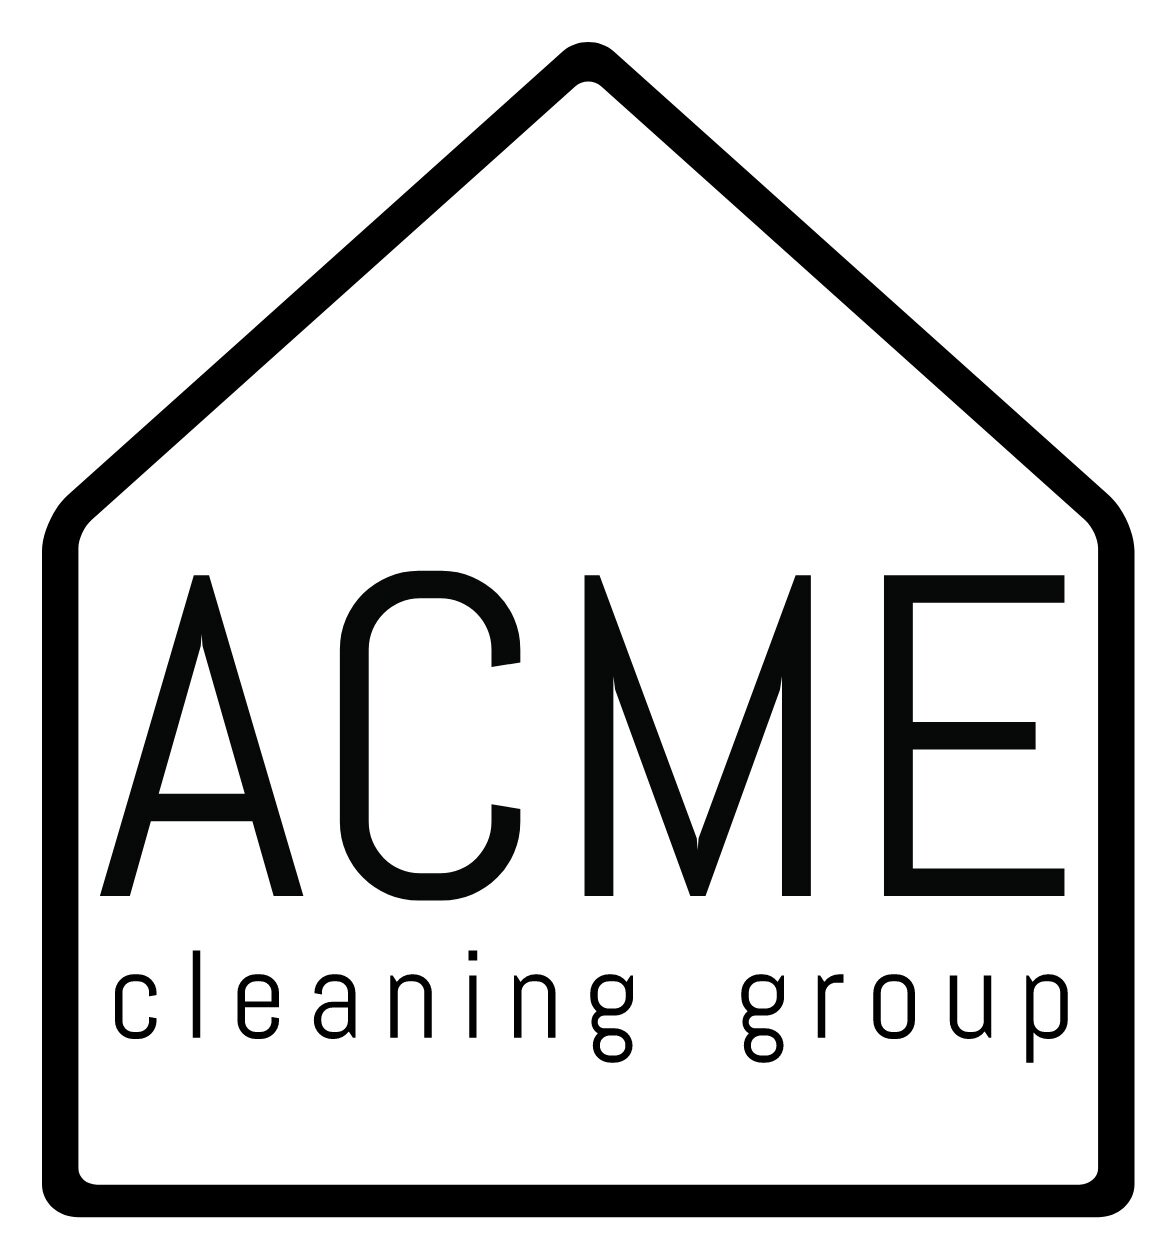 ACME cleaning group